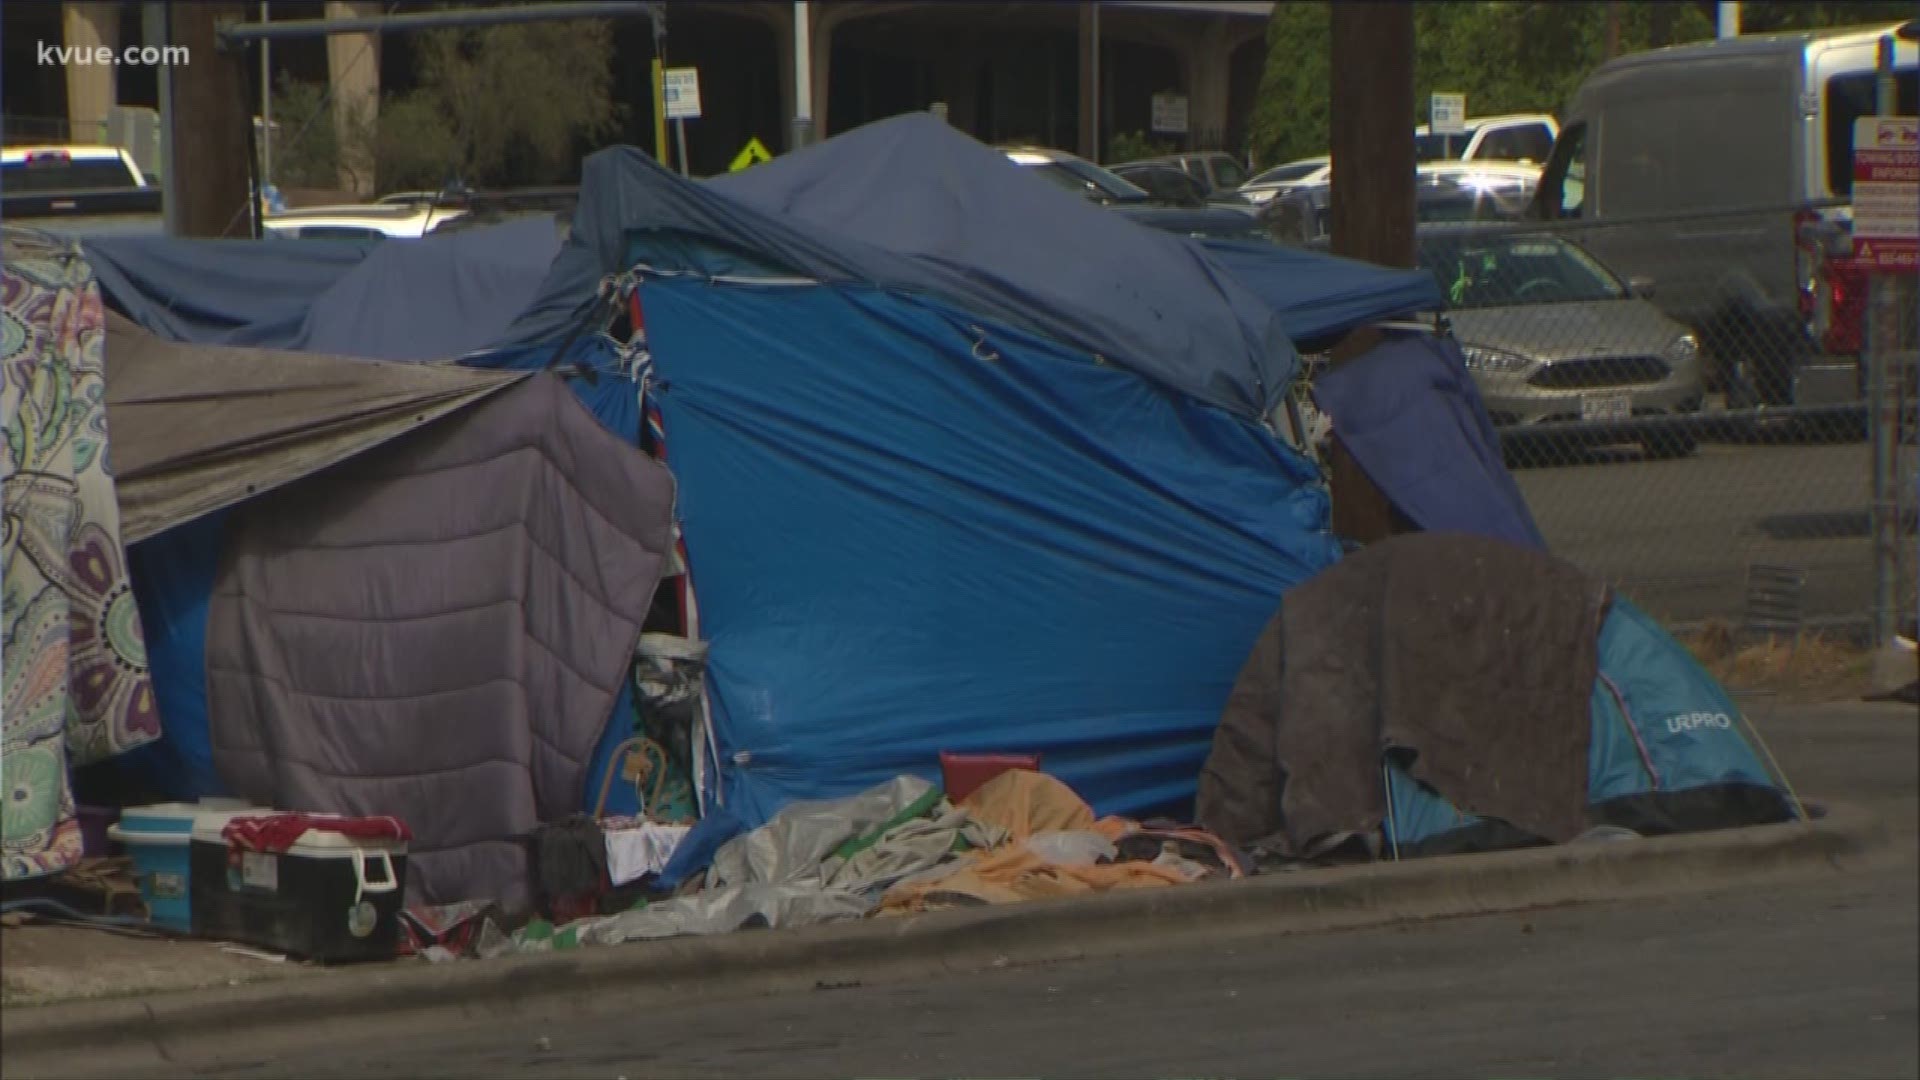 Governor Greg Abbott is threatening to unleash the power of the State if Austin doesn't make changes to how it handles problems with the homeless population.